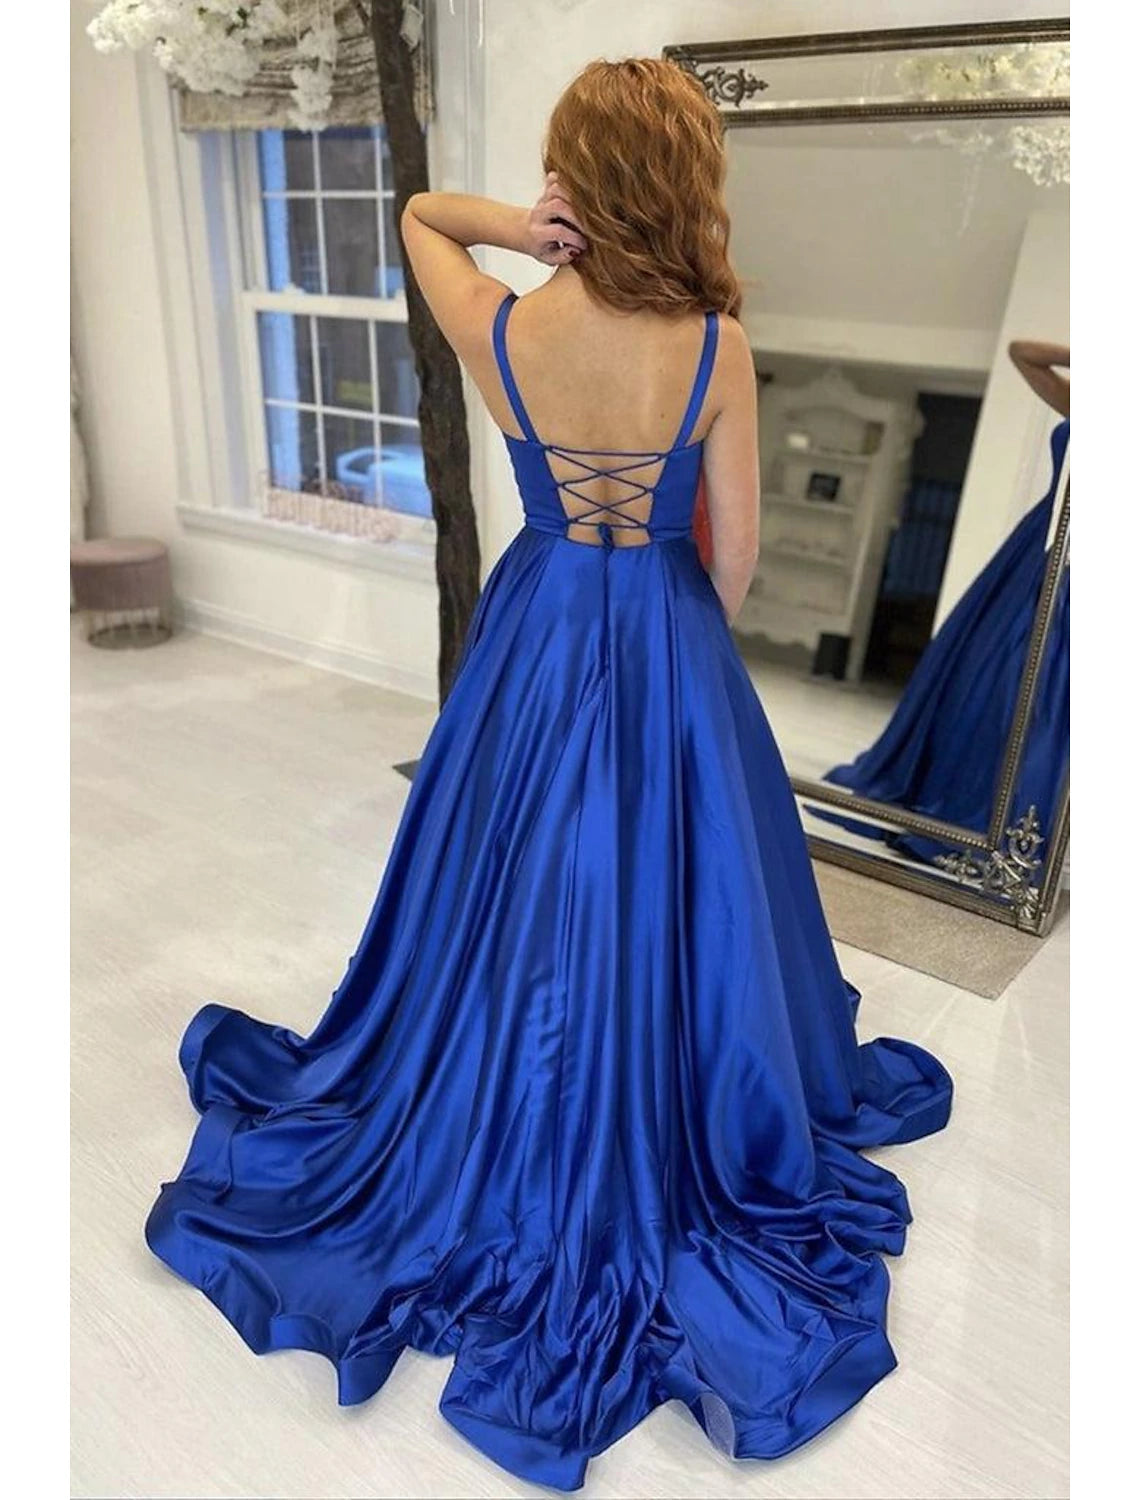 Wholesa A-Line Prom Dresses Princess Dress Formal Prom Sweep / Brush Train Sleeveless Strapless Satin Backless with Pleats